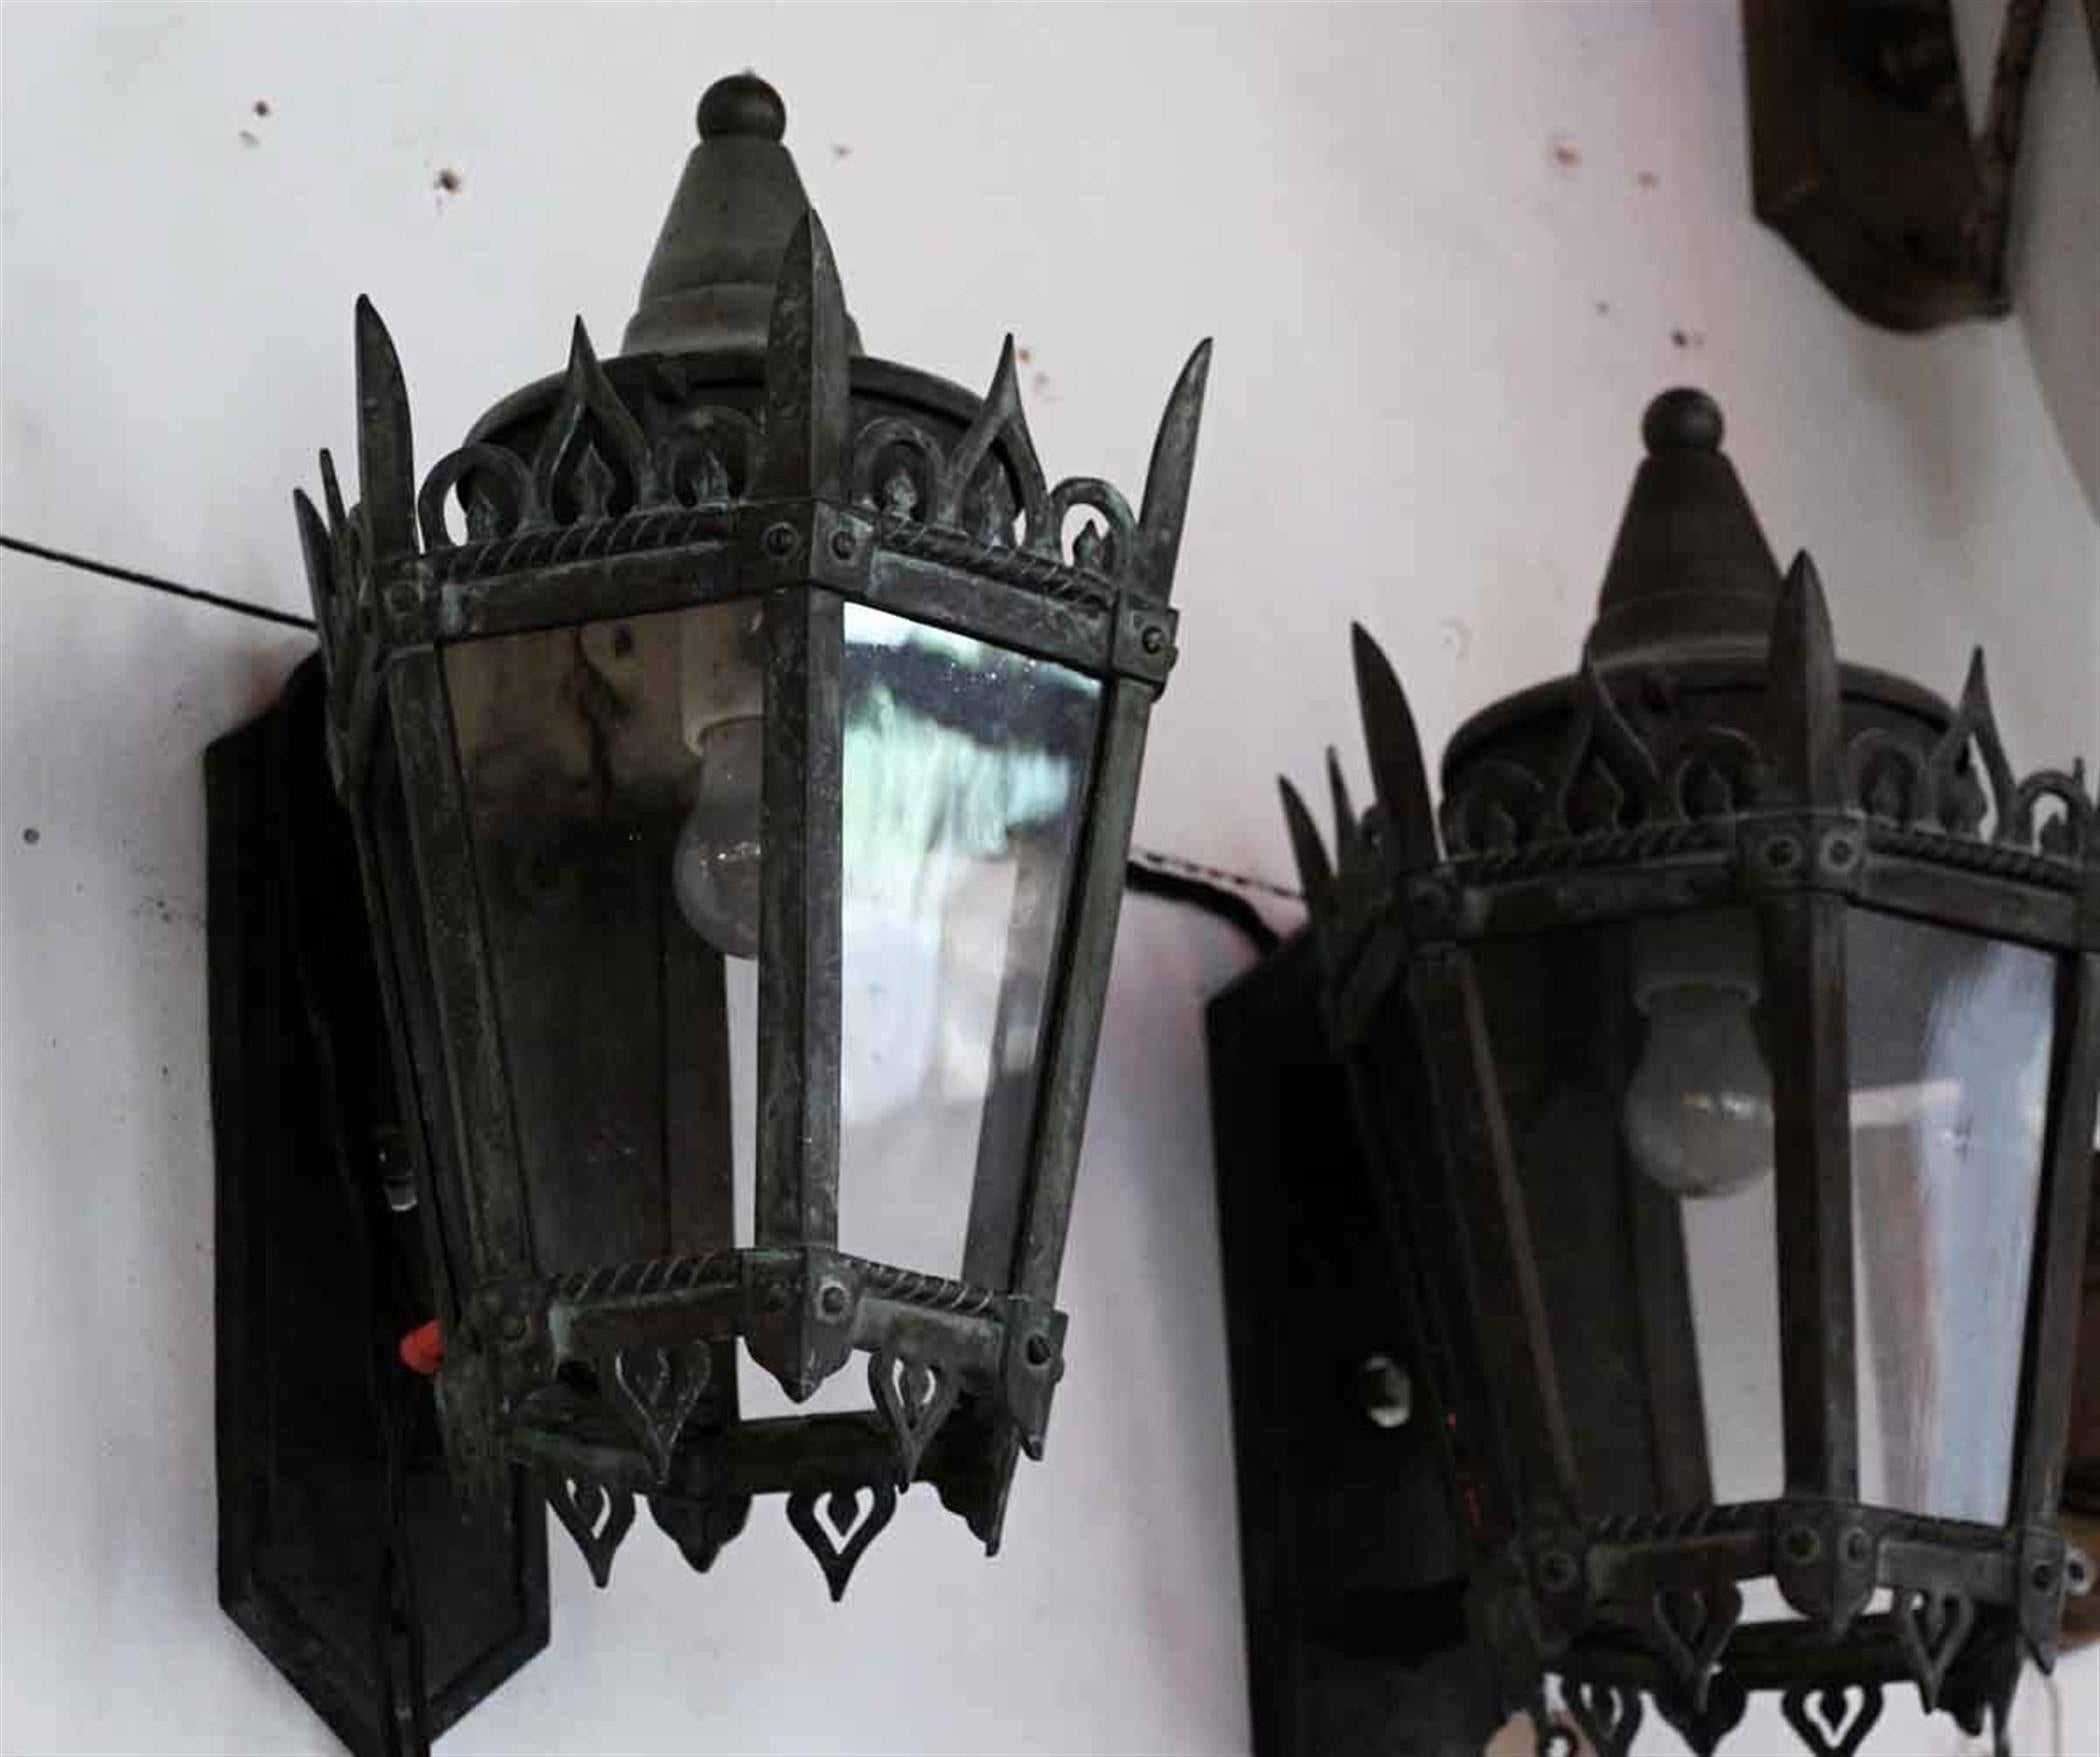 1930s pair of Art Deco bronze exterior sconces with original glass panels and patina. All glass panels can be replaced. This can be seen at our 2420 Broadway location on the upper west side in Manhattan.